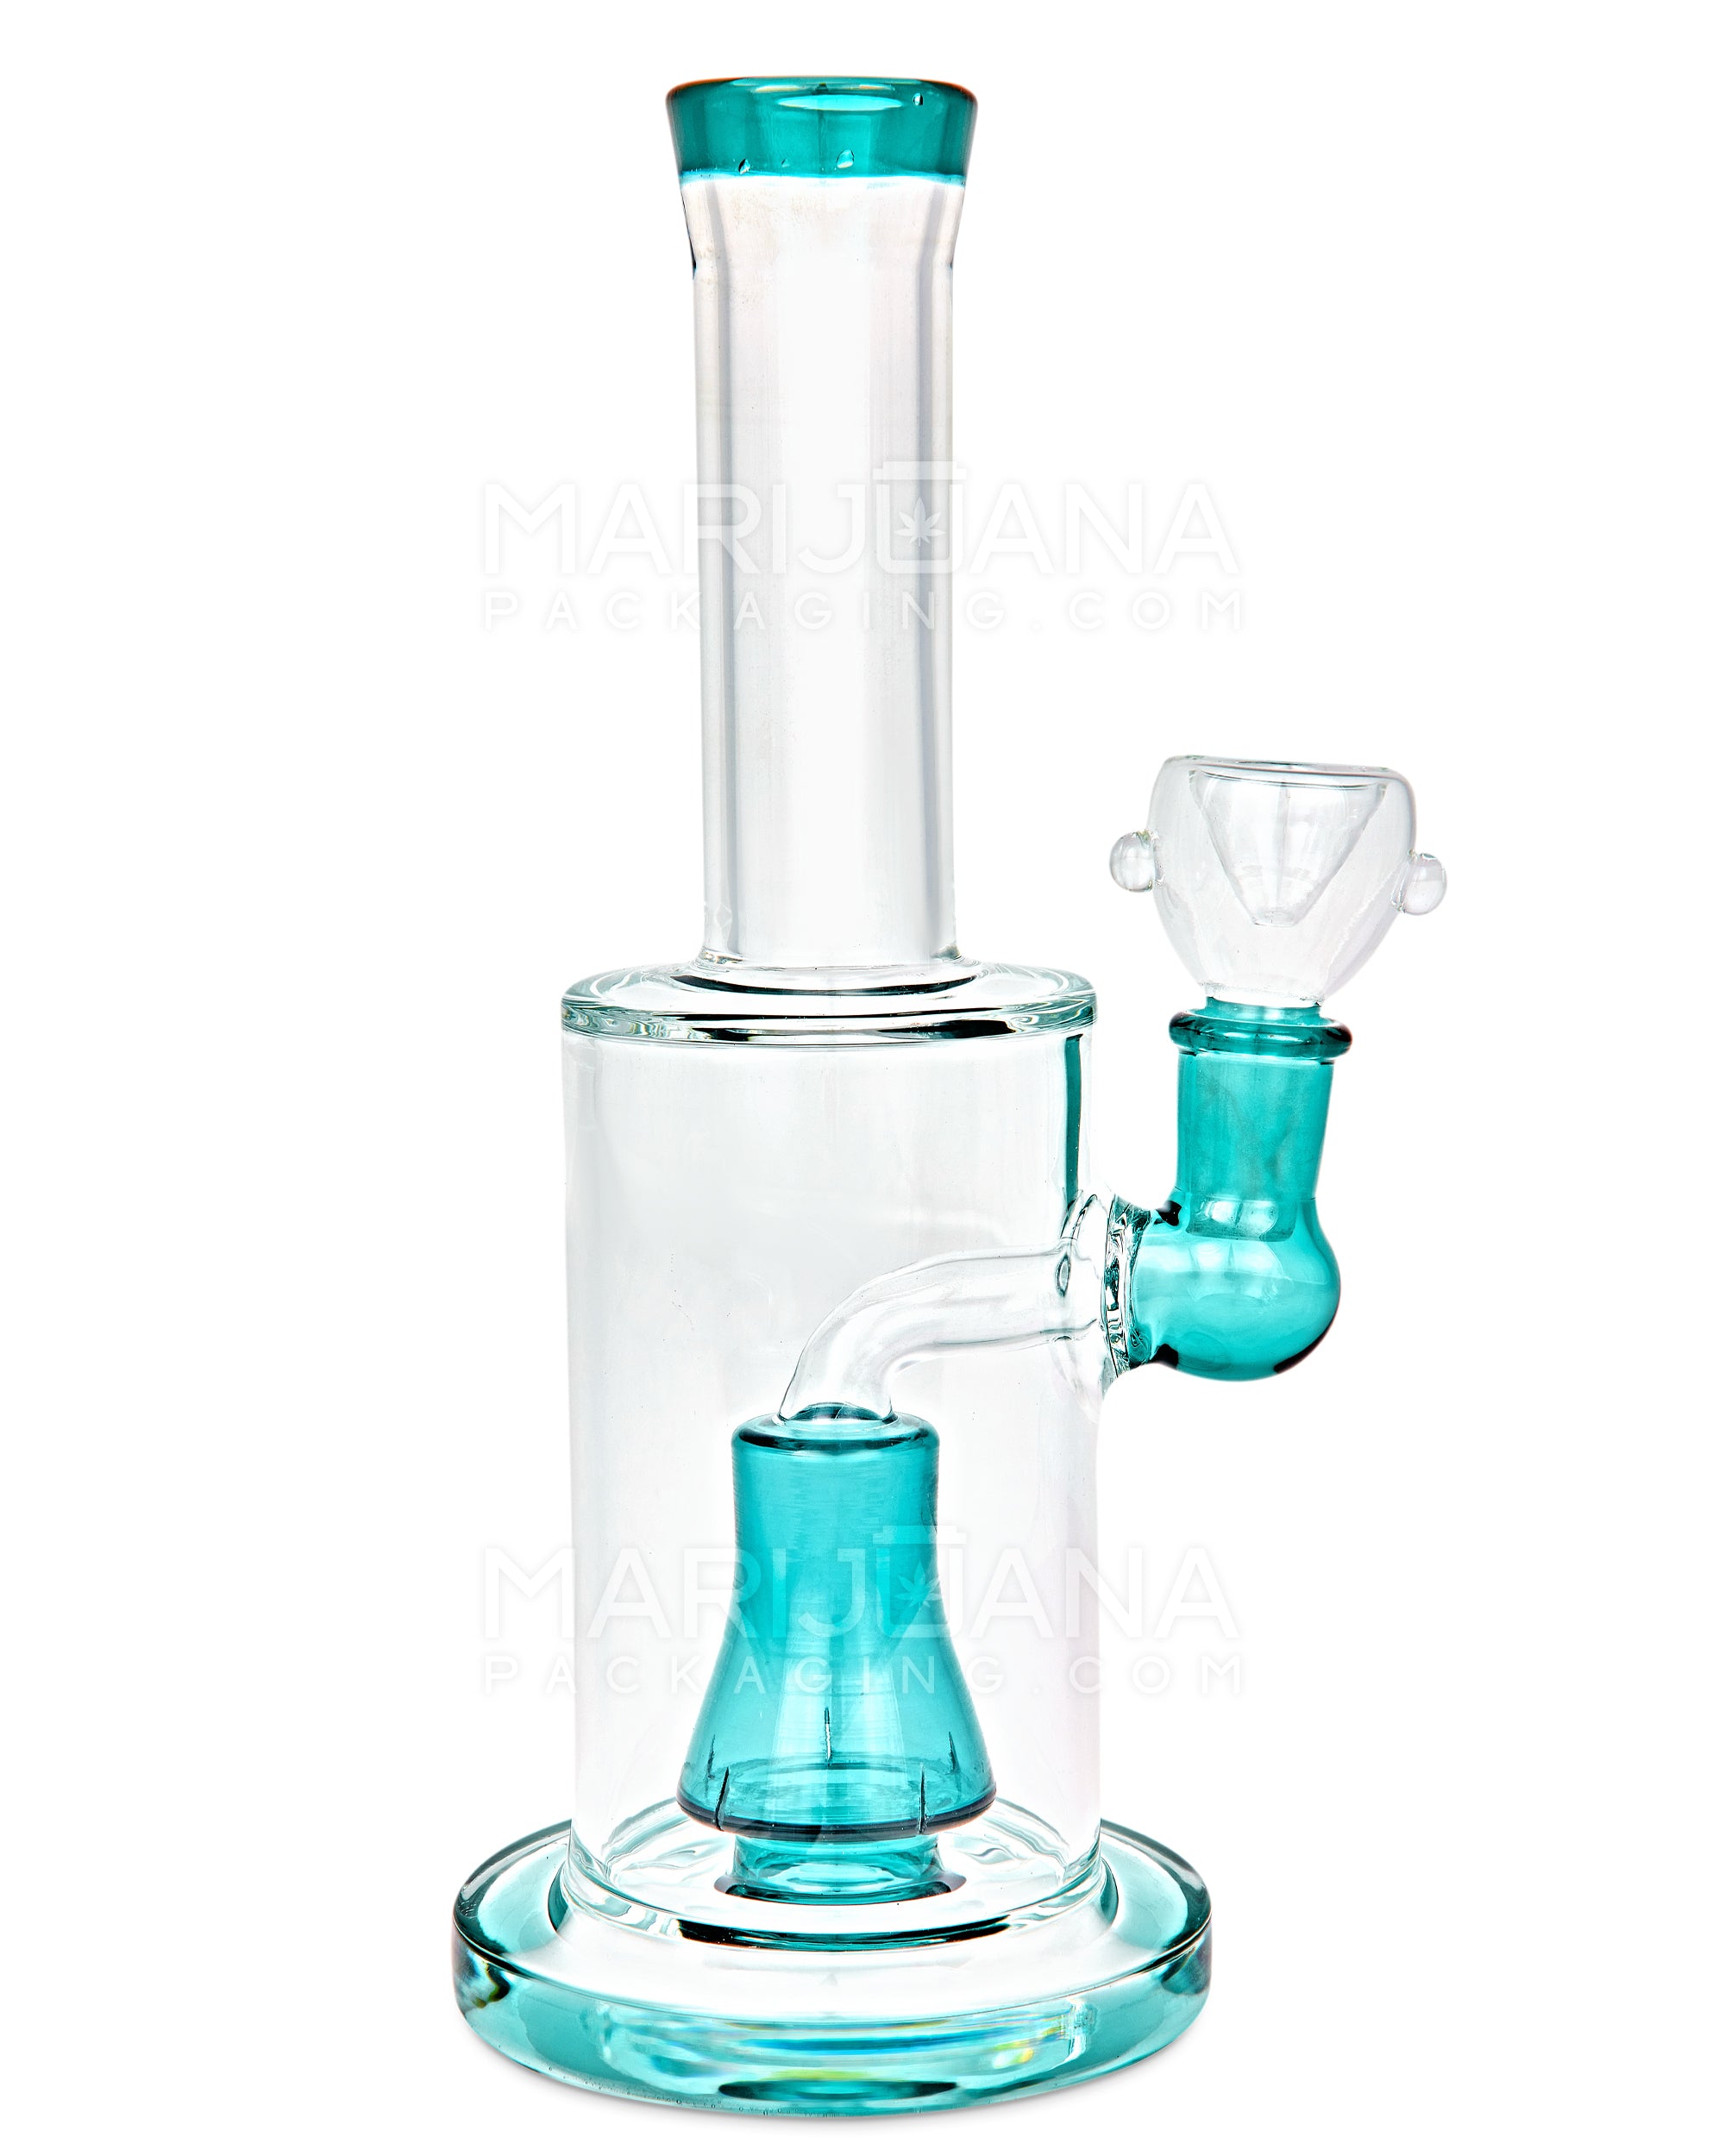 Straight Neck Barrel Perc Glass Water Pipe w/ Thick Base | 8in Tall - 14mm Bowl - Teal - 1